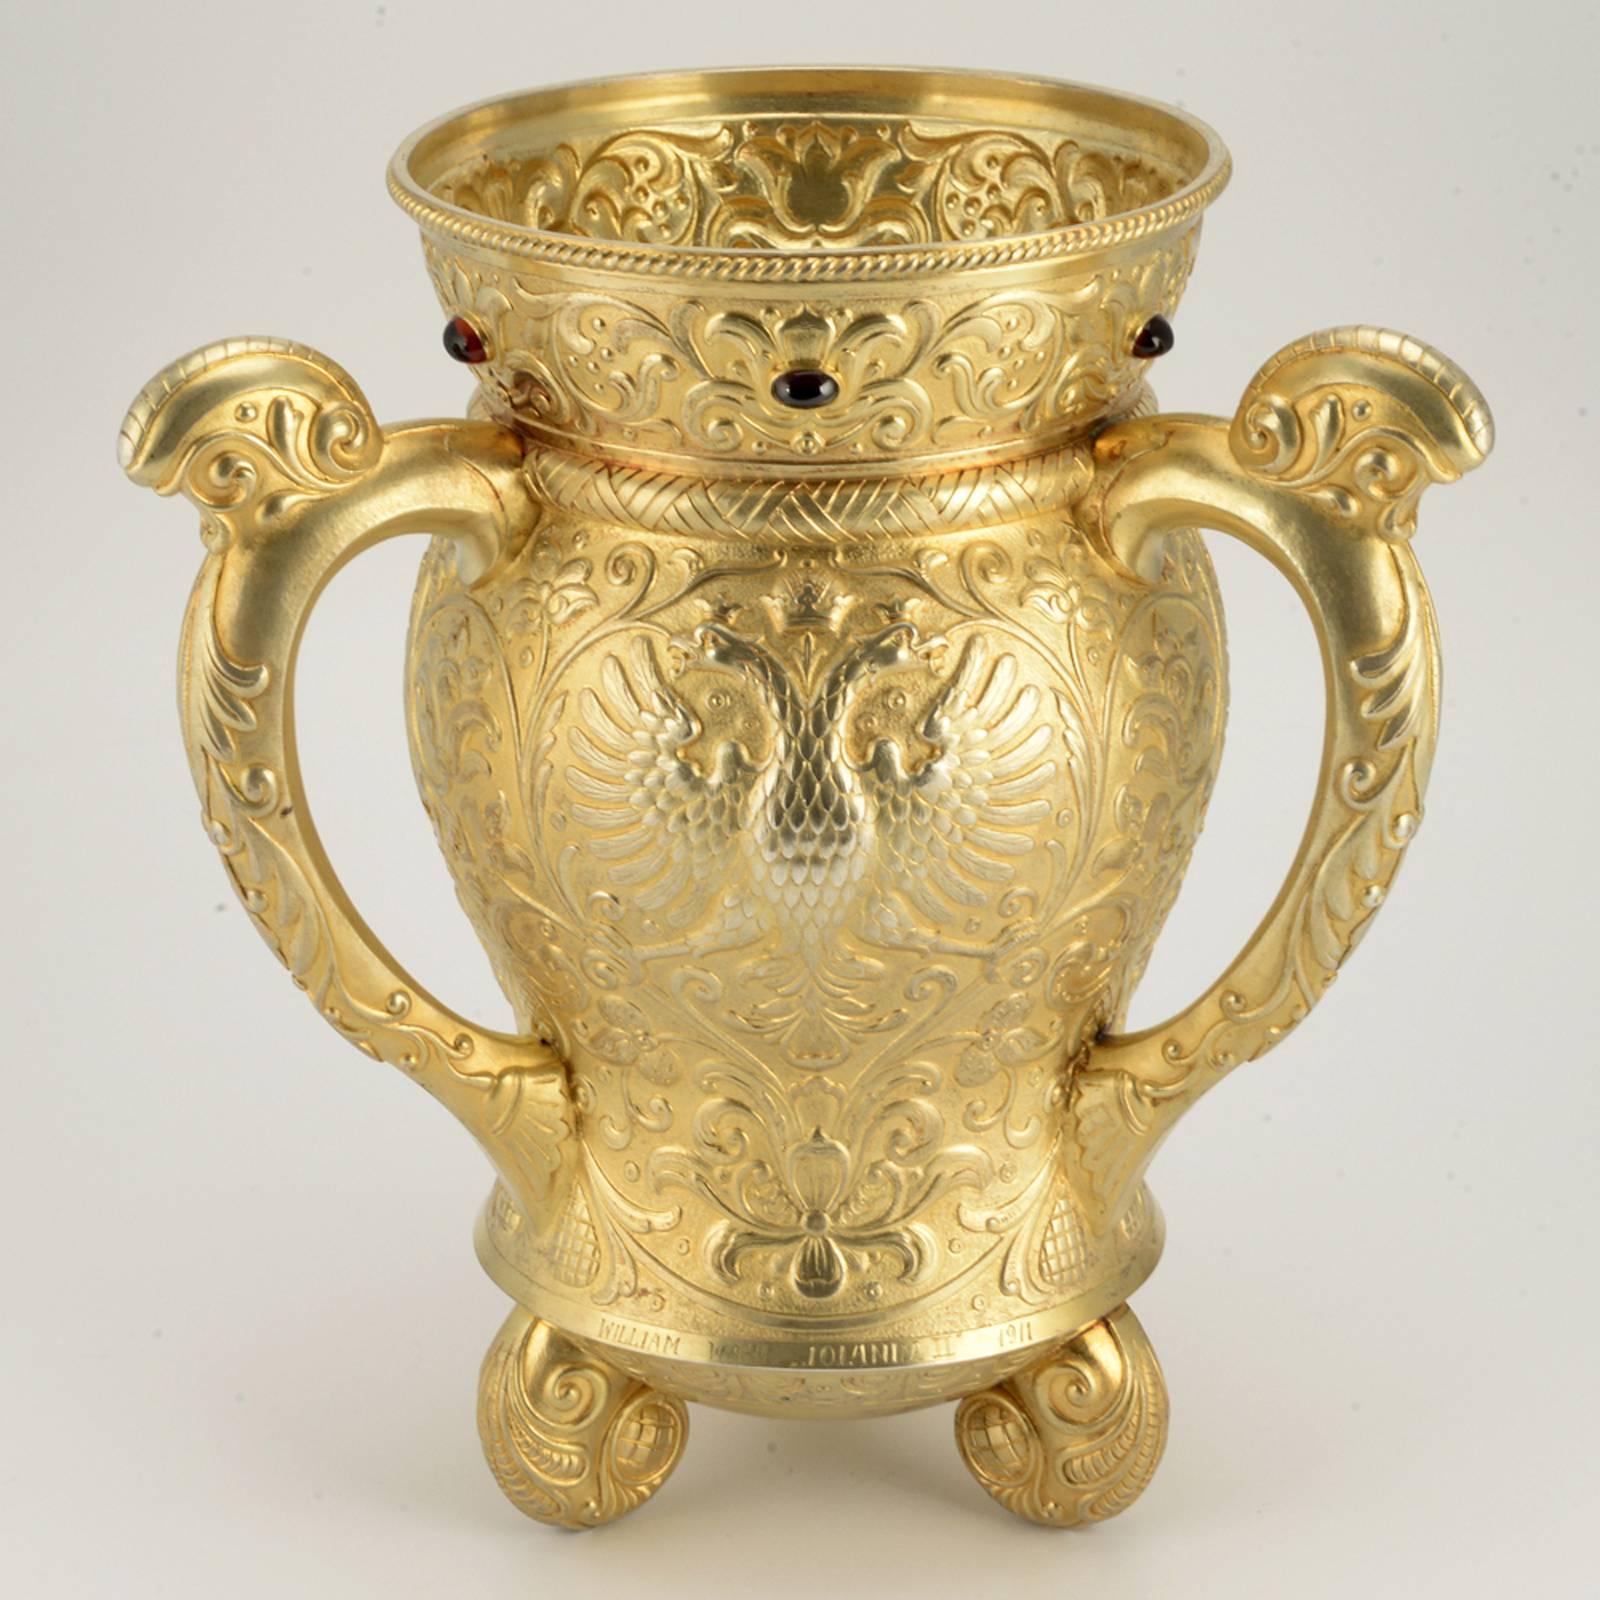 A Russian gem-set gilded silver three-handled loving cup yachting trophy, Ovchinnikov, Moscow, 1908-1911. The body of baluster form with flaring neck, chased and repoussé with three double-headed Imperial eagles within chased Usolk-style floral and